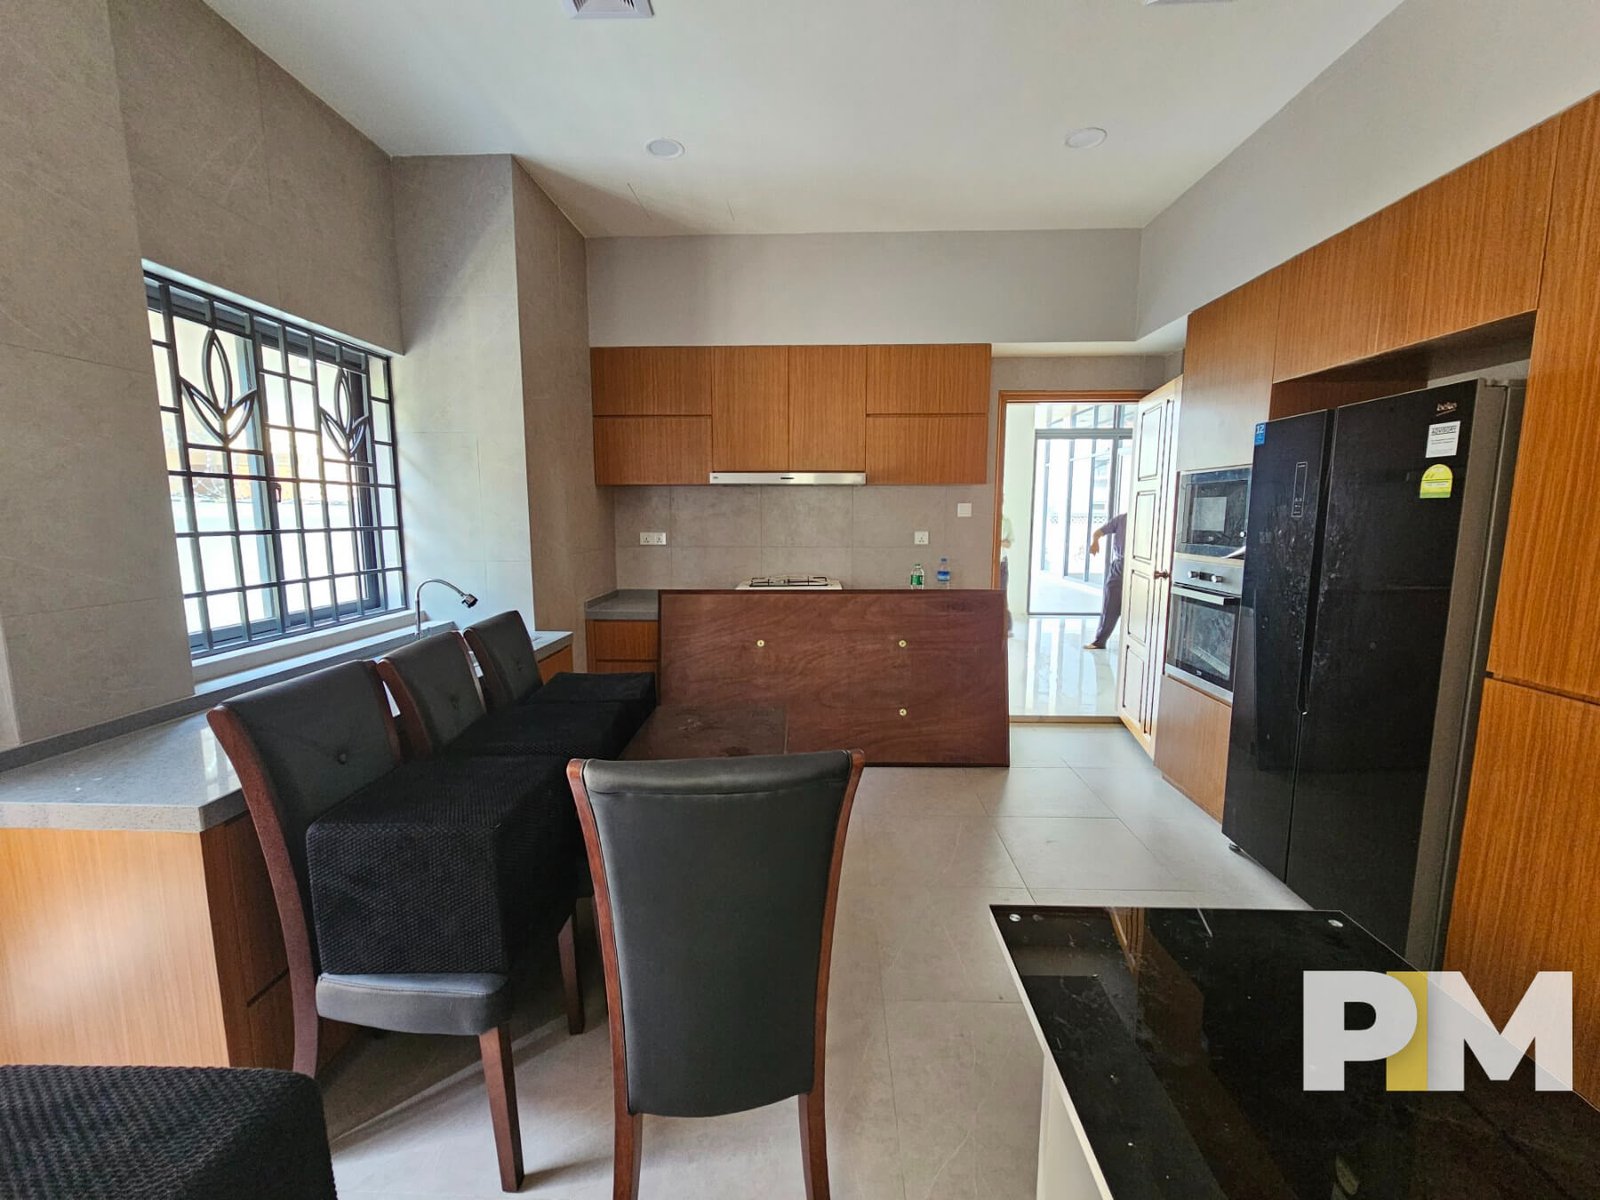 Dining room and kitchen - Myanmar Real Estate